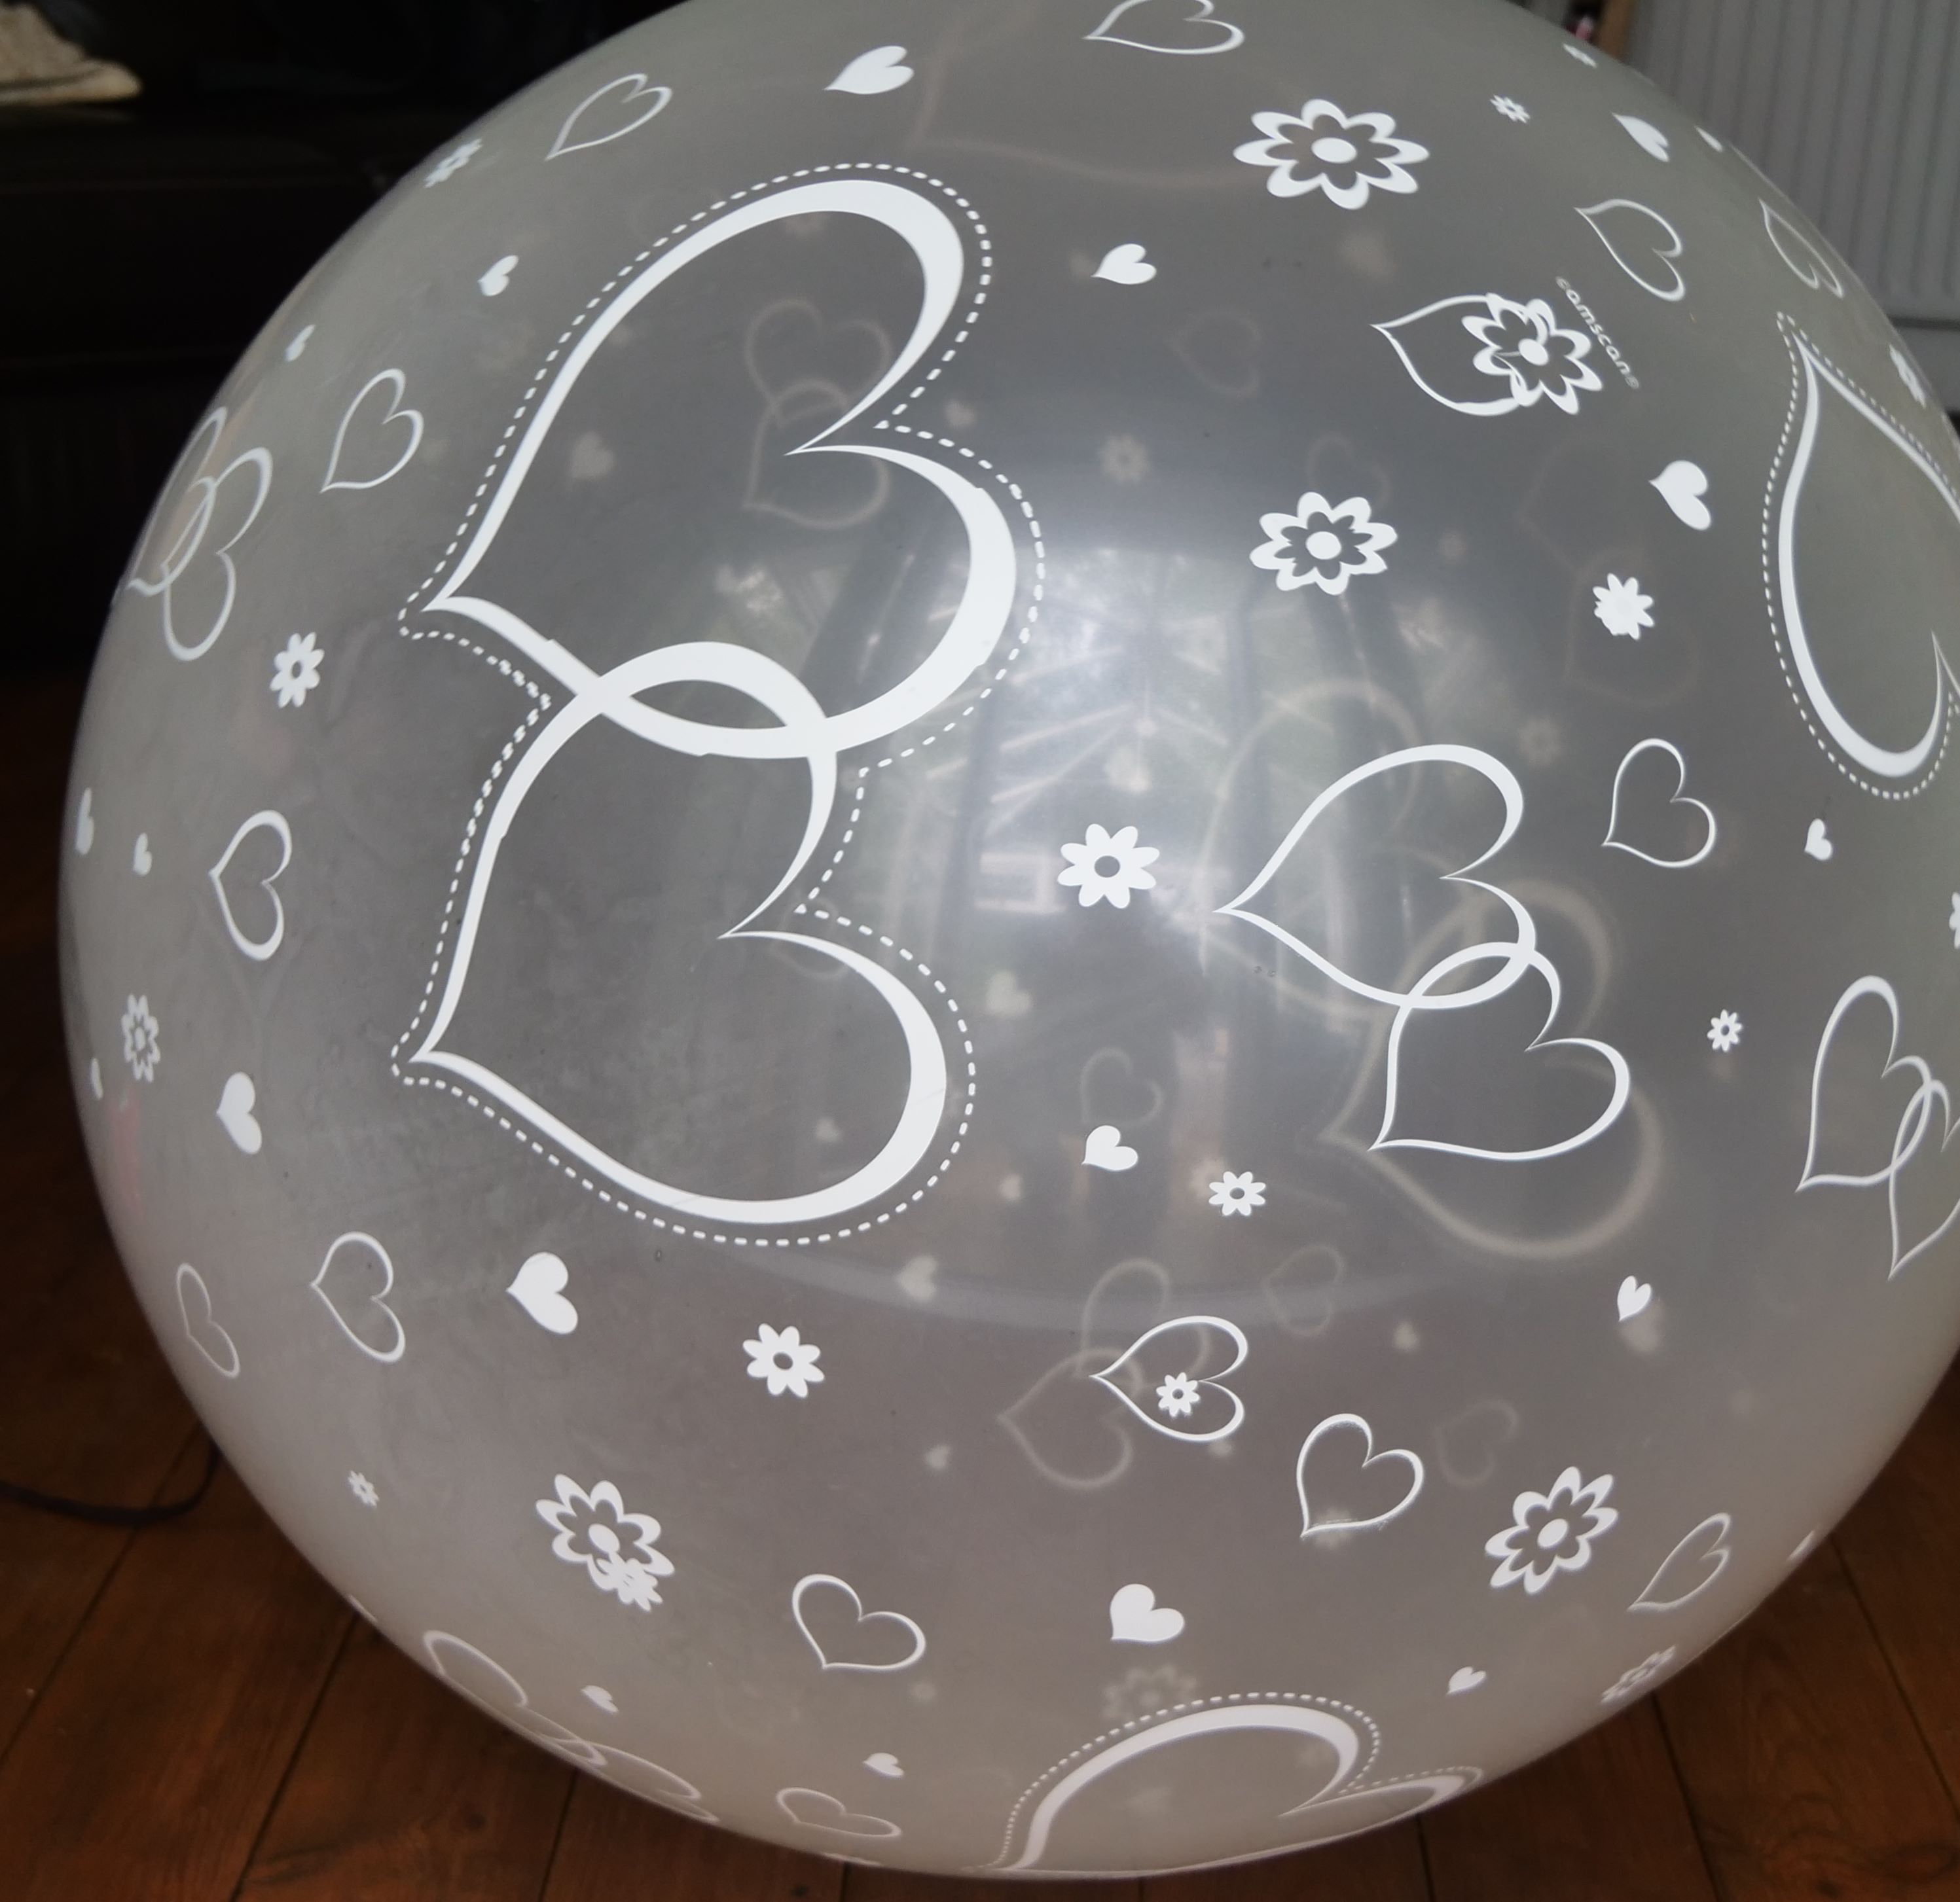 100 x Giant 3ft Round Balloons. Amscan latex Biodegradable 4 designs